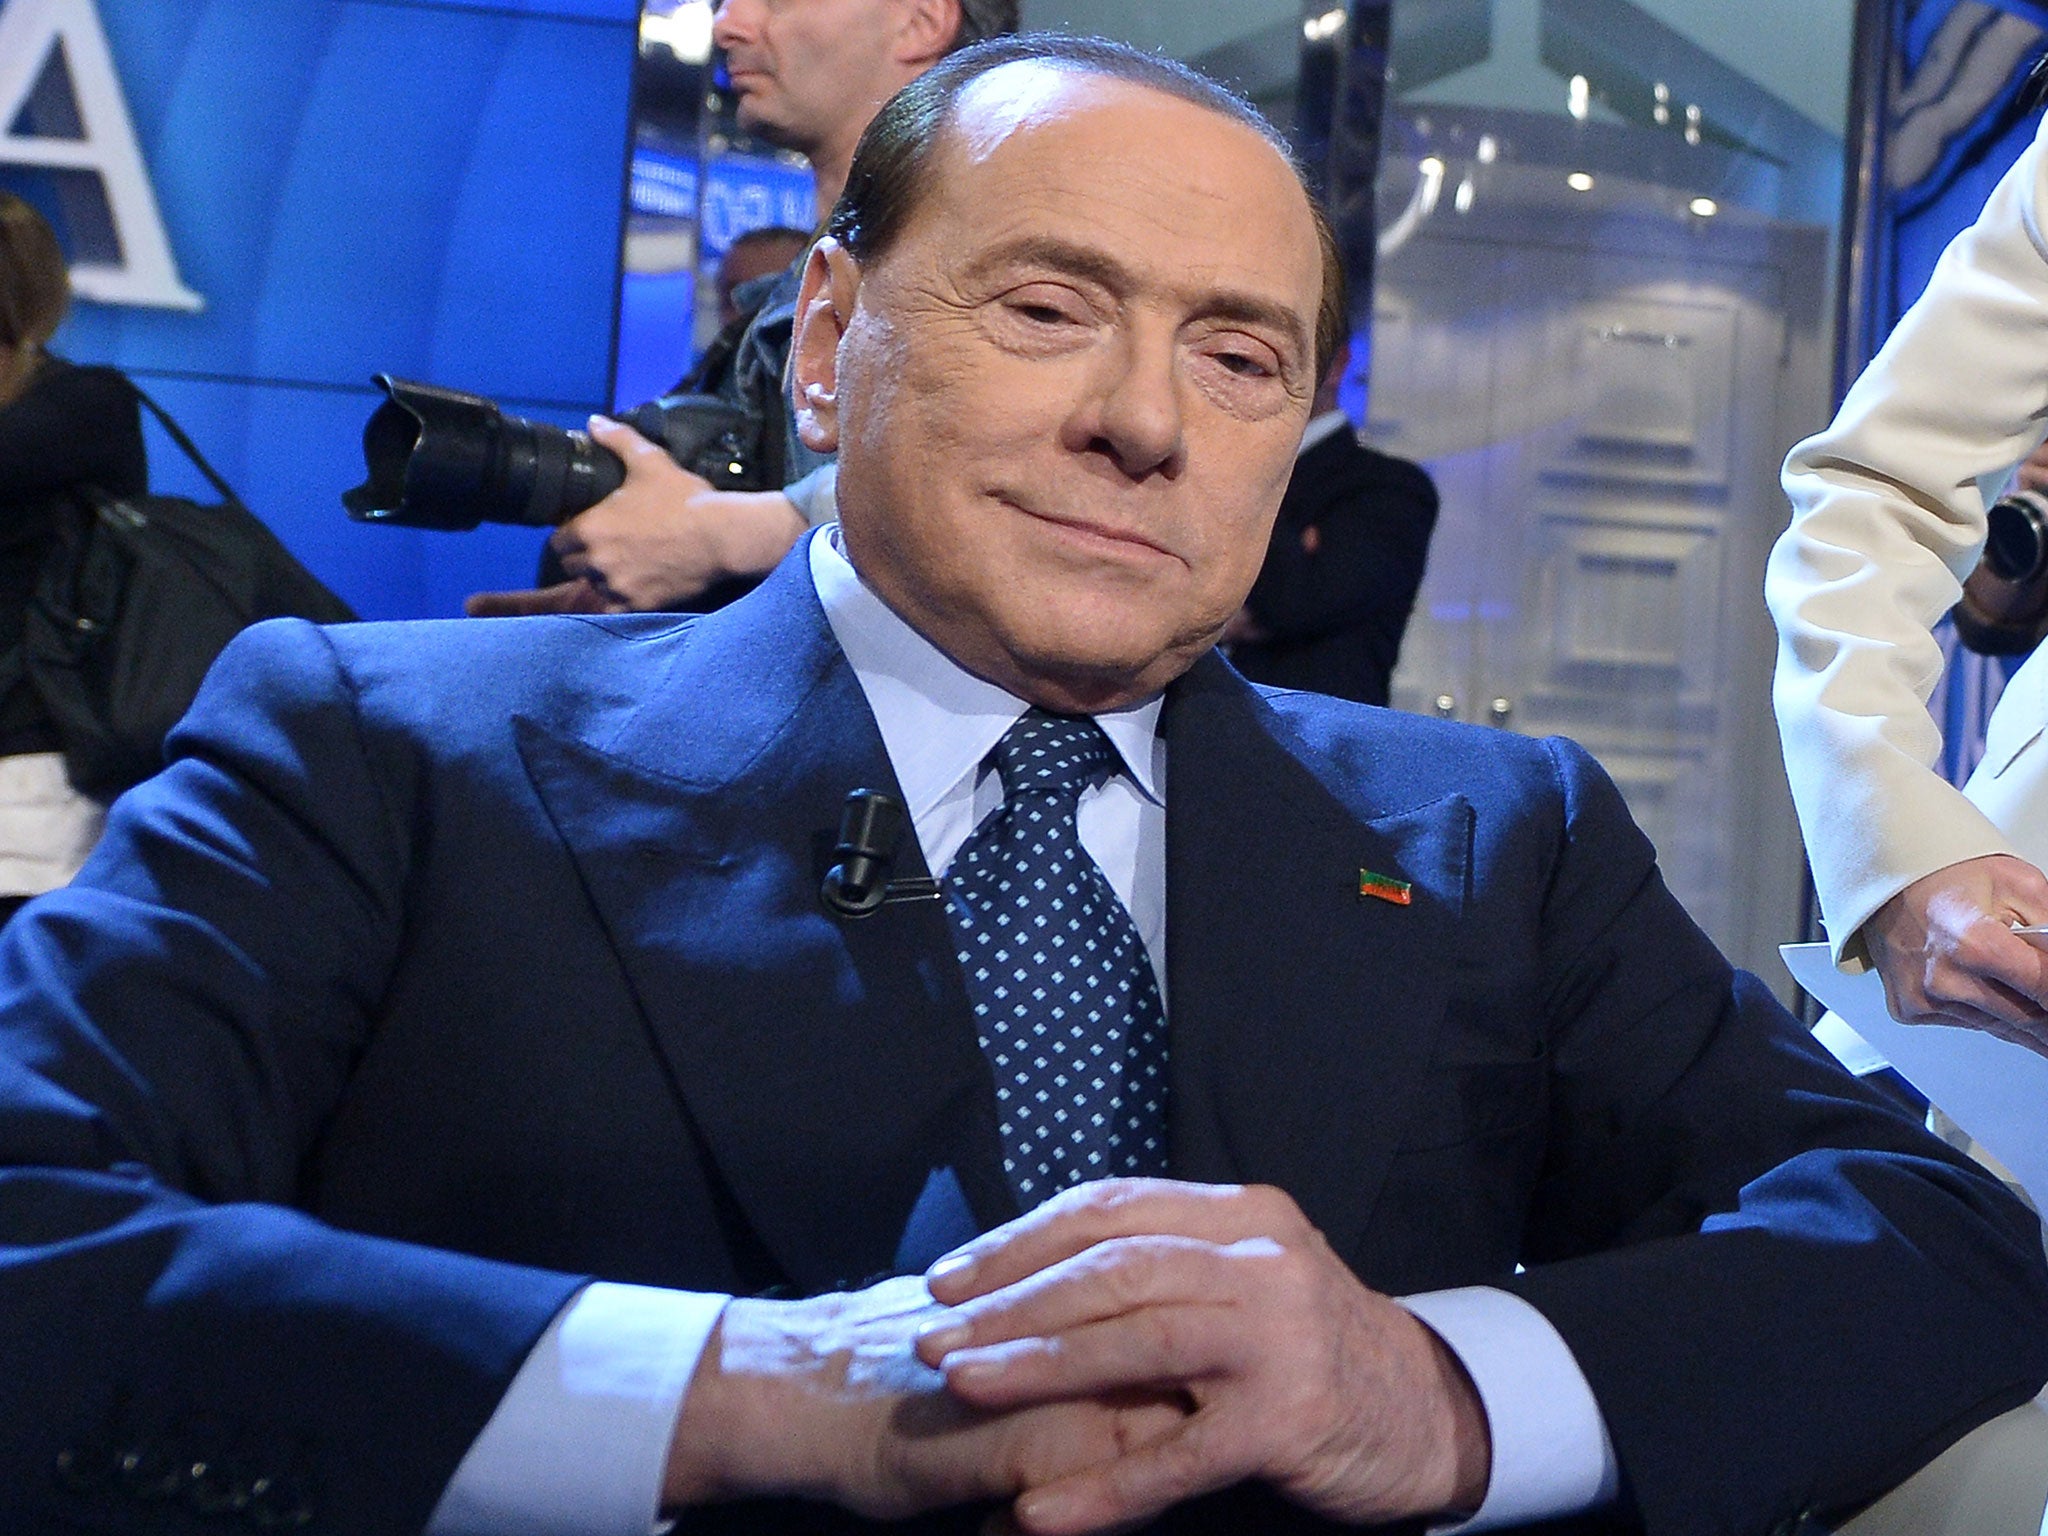 Berlusconi has constantly sought new ways to revive his ailing conservative Forza Italia party